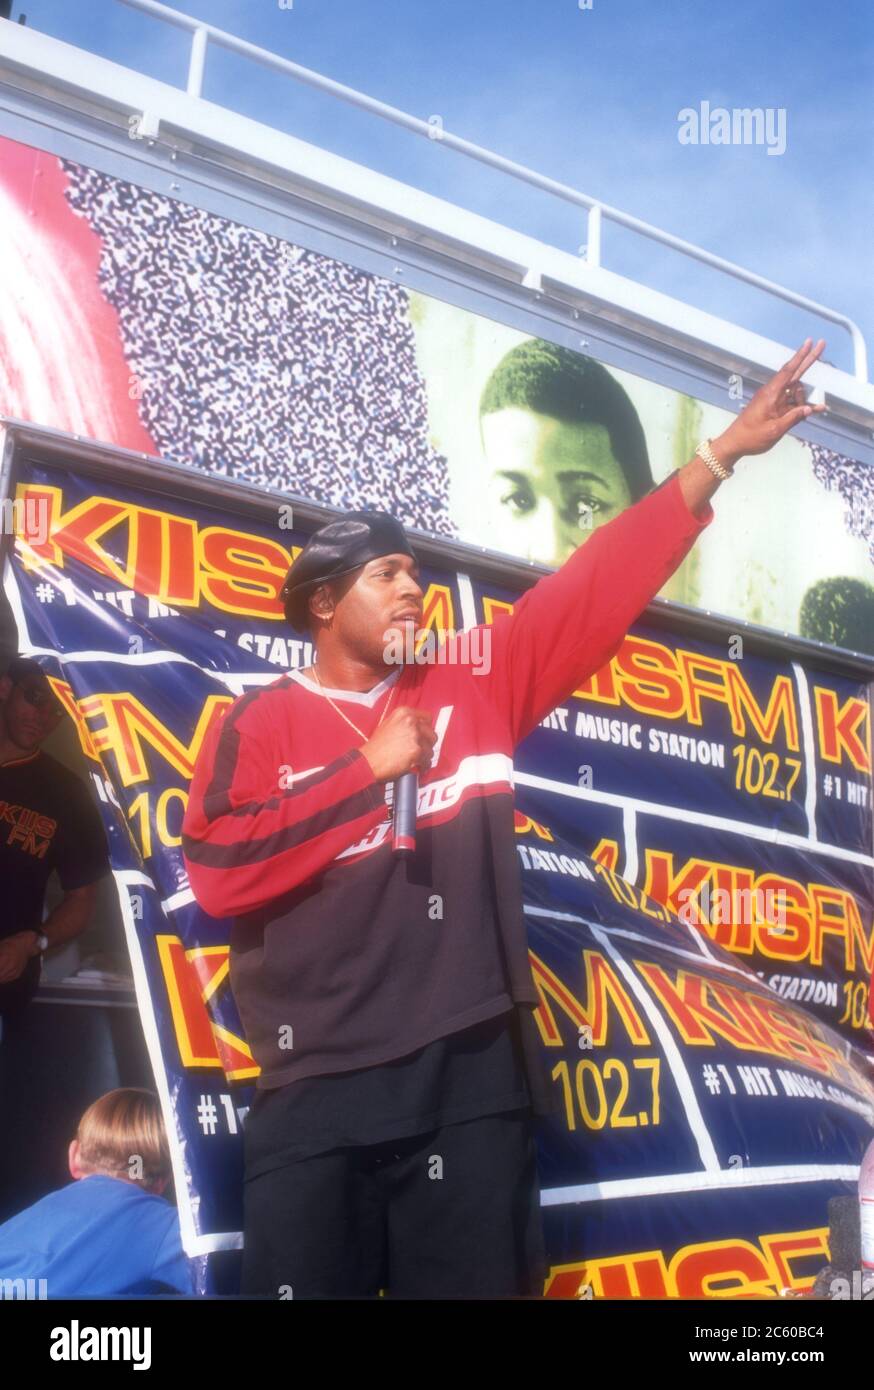 Los Angeles, California, USA 9th December 1995 Singer/actor LL Cool J attends KIIS FM Promotion Concert on December 9, 1995 in Los Angeles, California, USA. Photo by Barry King/Alamy Stock Photo Stock Photo